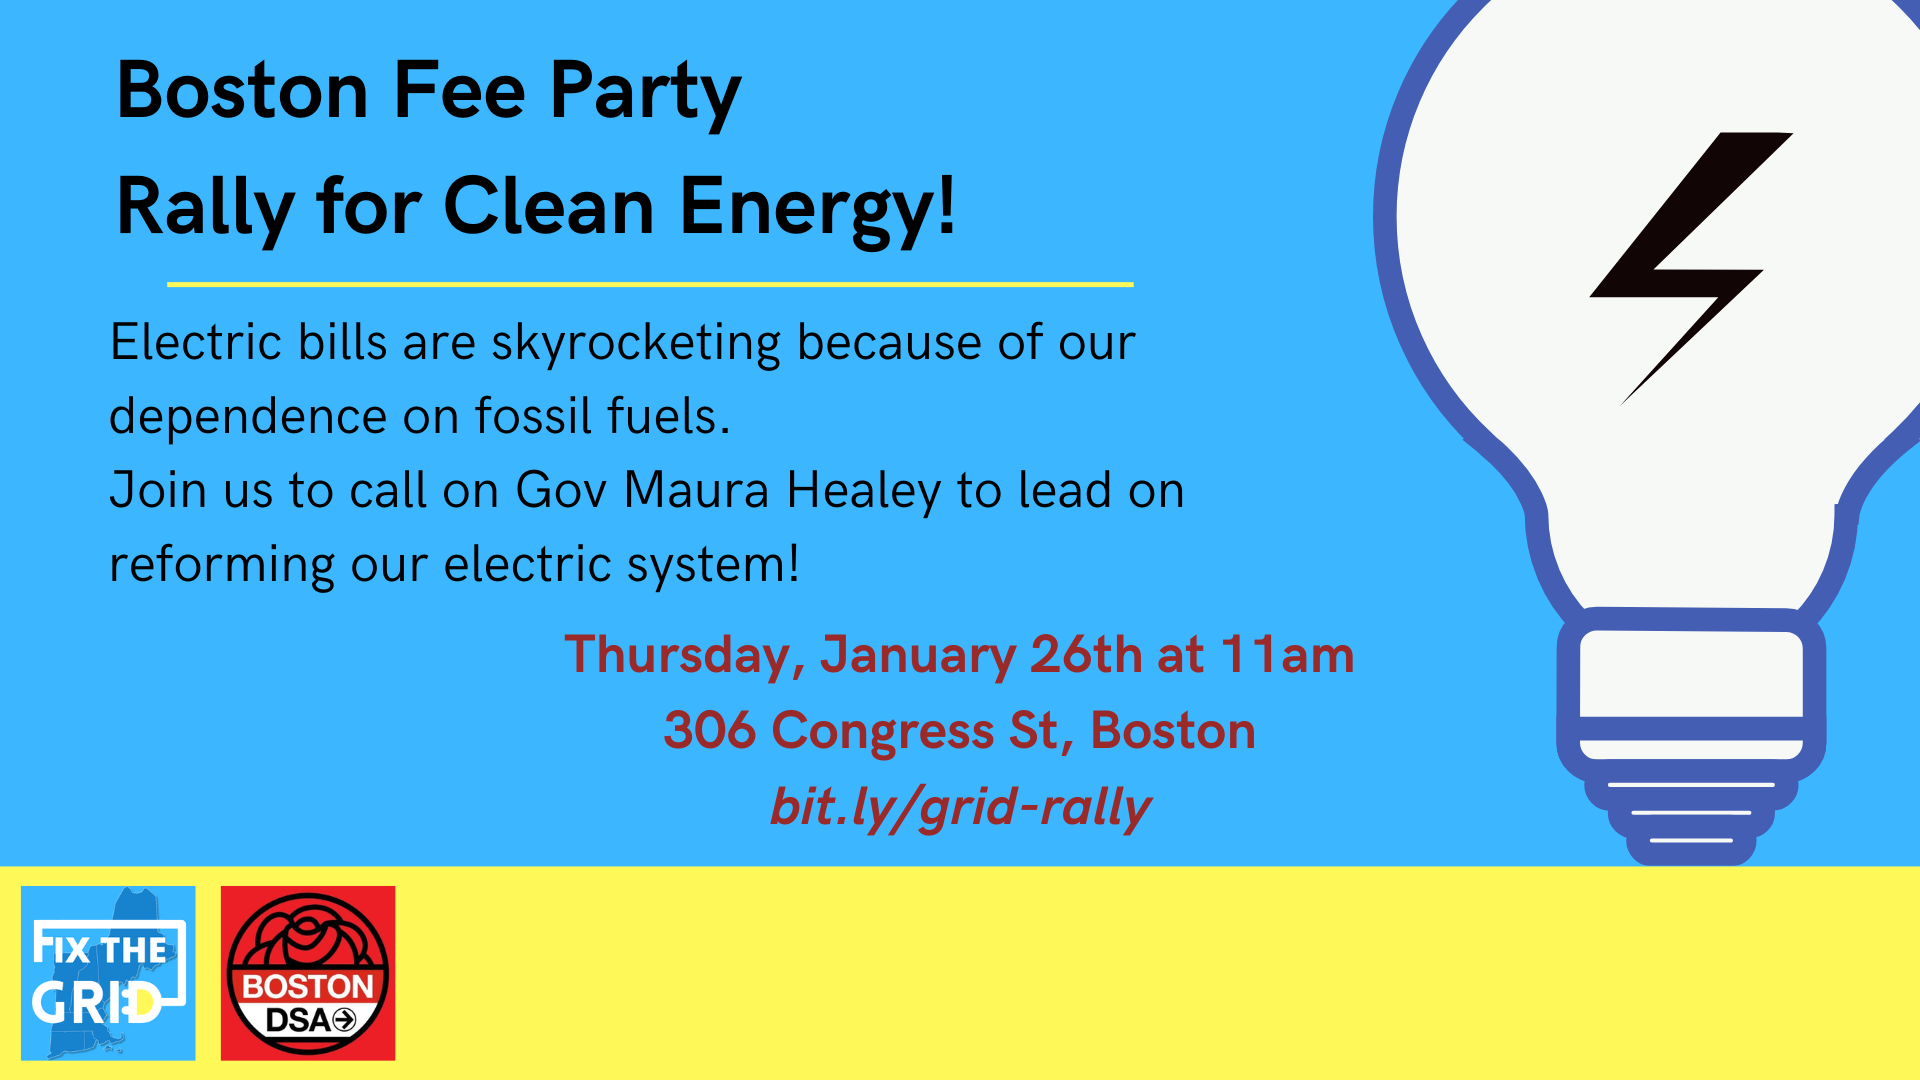 Boston Fee Party Rally for Clean Energy! Electric bills are skyrocketing because of our dependence on fossil fuels. Join us to call on Gov. Maura Healey to lead on reforming our electric system! Thursday, January 26th at 11am. 306 Congress Street, Boston. bit.ly/grid-rally Fix the Grid & Boston DSA logos